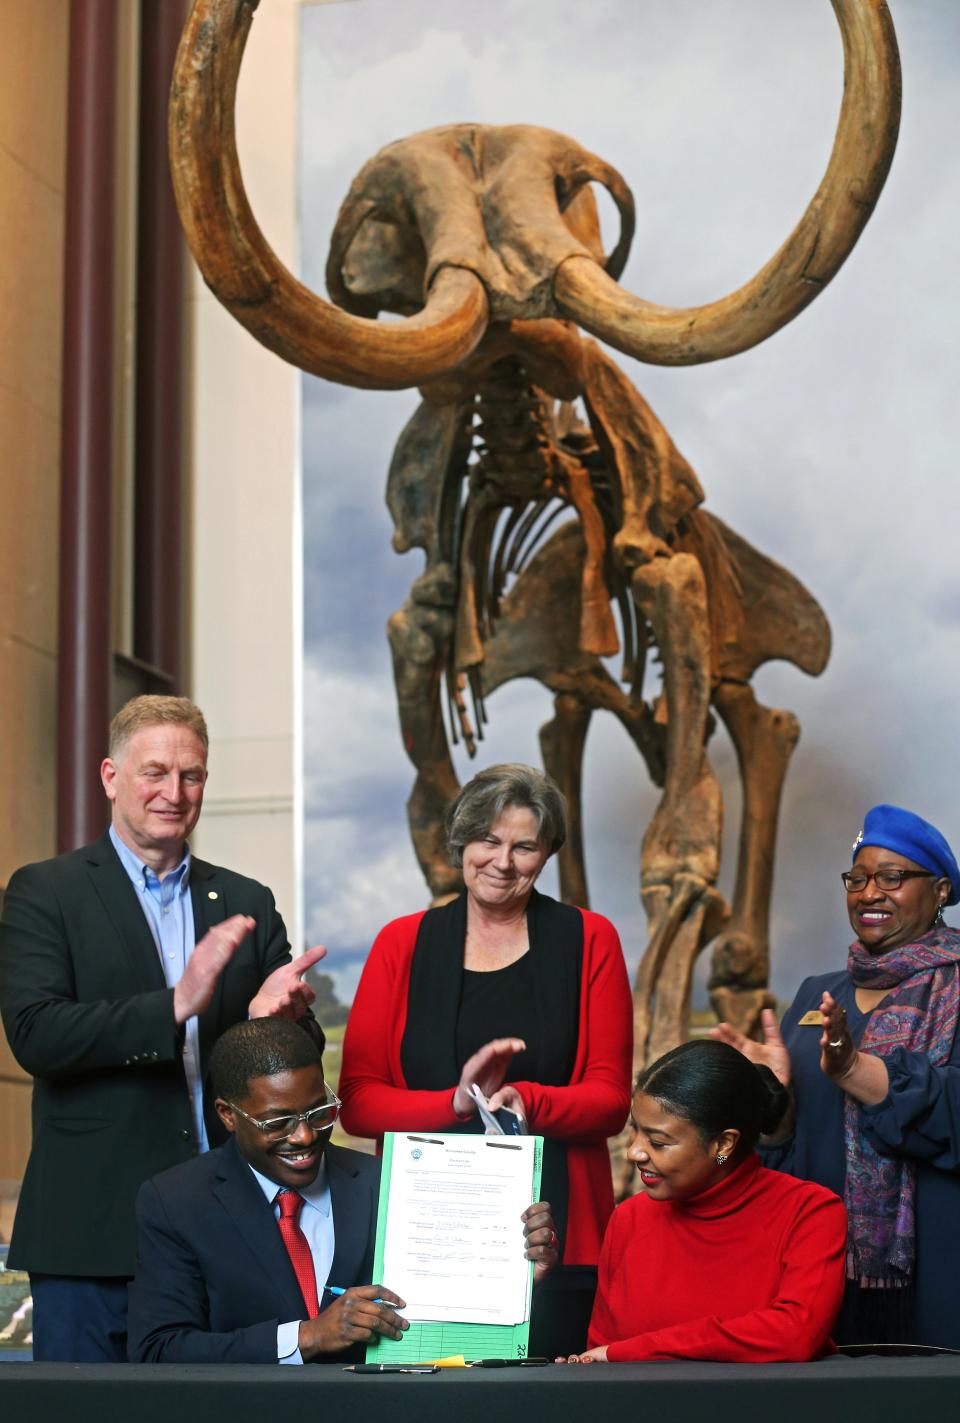 Milwaukee County Executive David Crowley, left seated and County Board Chairwoman Marcelia Nicholson, right seated, show legislation that was sign that will provide $45 million in funding for construction of the Milwaukee Public Museum’s new museum building on Monday, March 21 2022.